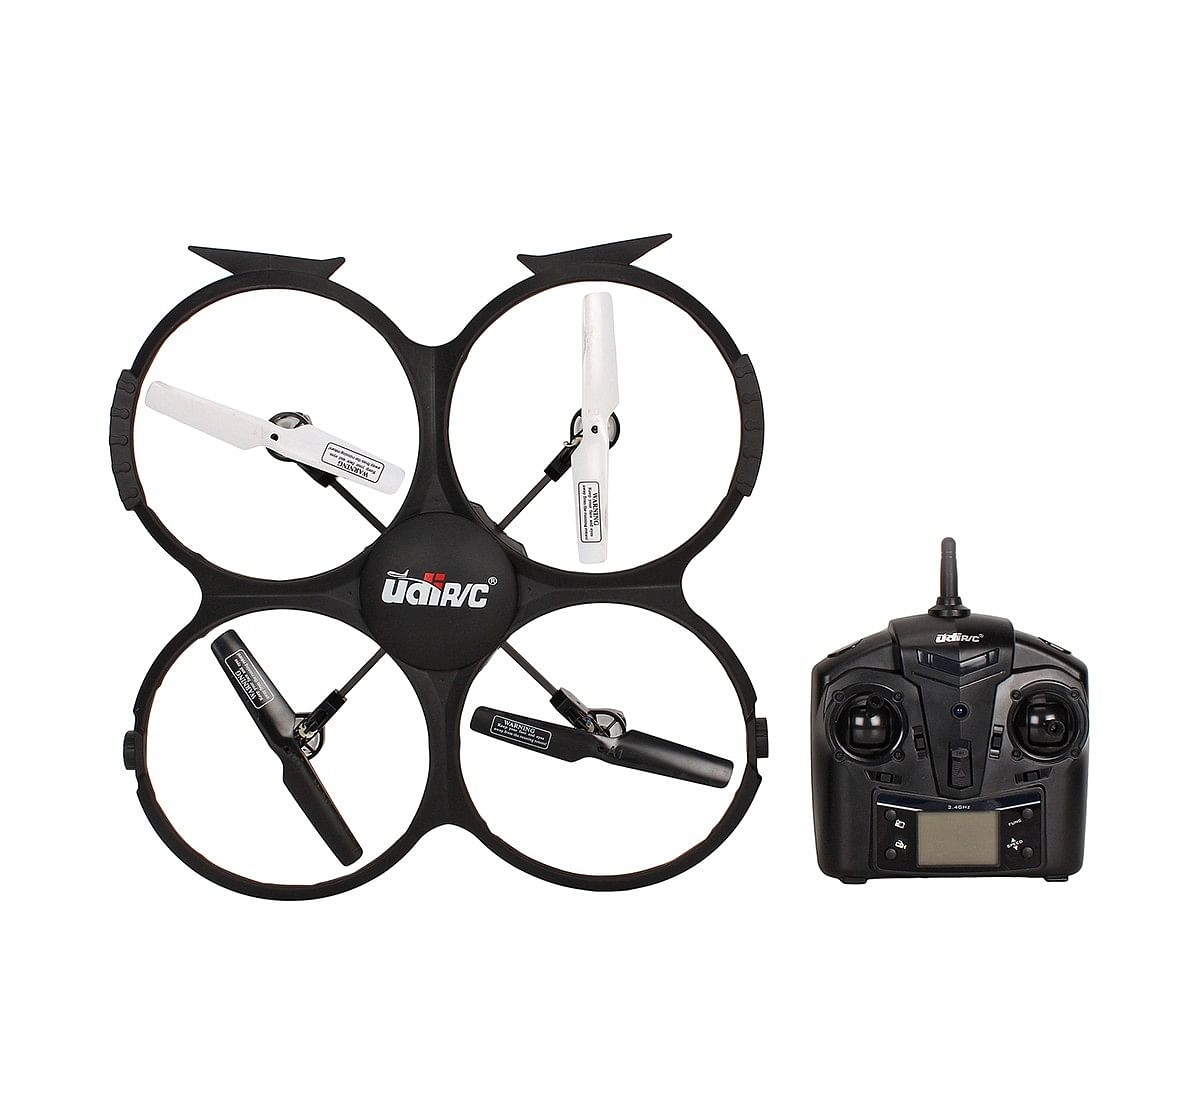 Sirius Toys Sirius Drone Xl With Camera Remote Control Toys for Kids age 14Y+ (Black)